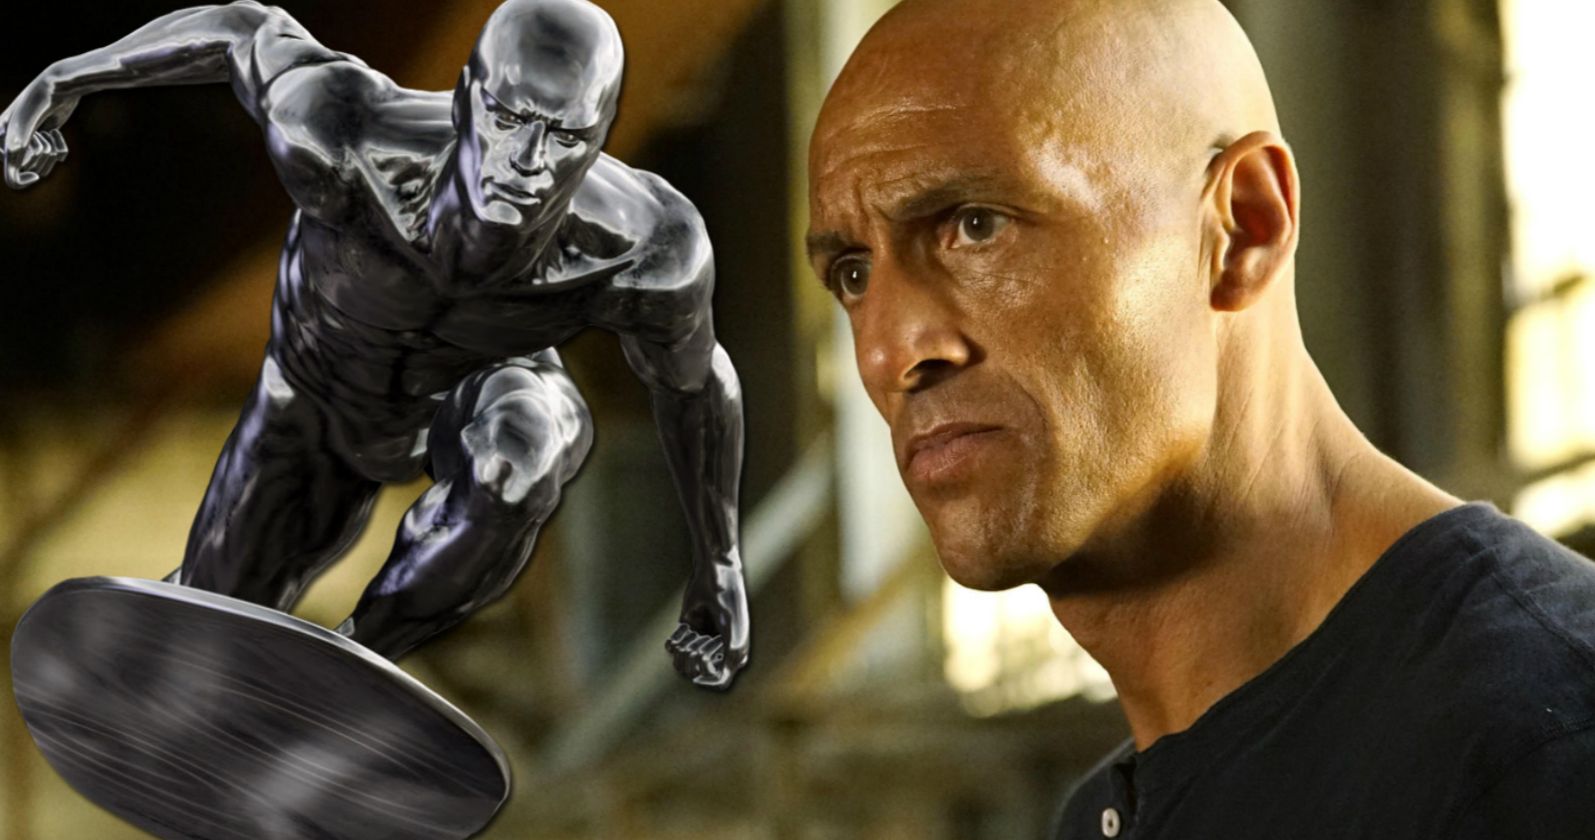 Agents of S.H.I.E.L.D. Star Nominates Himself to Play Silver Surfer in the MCU